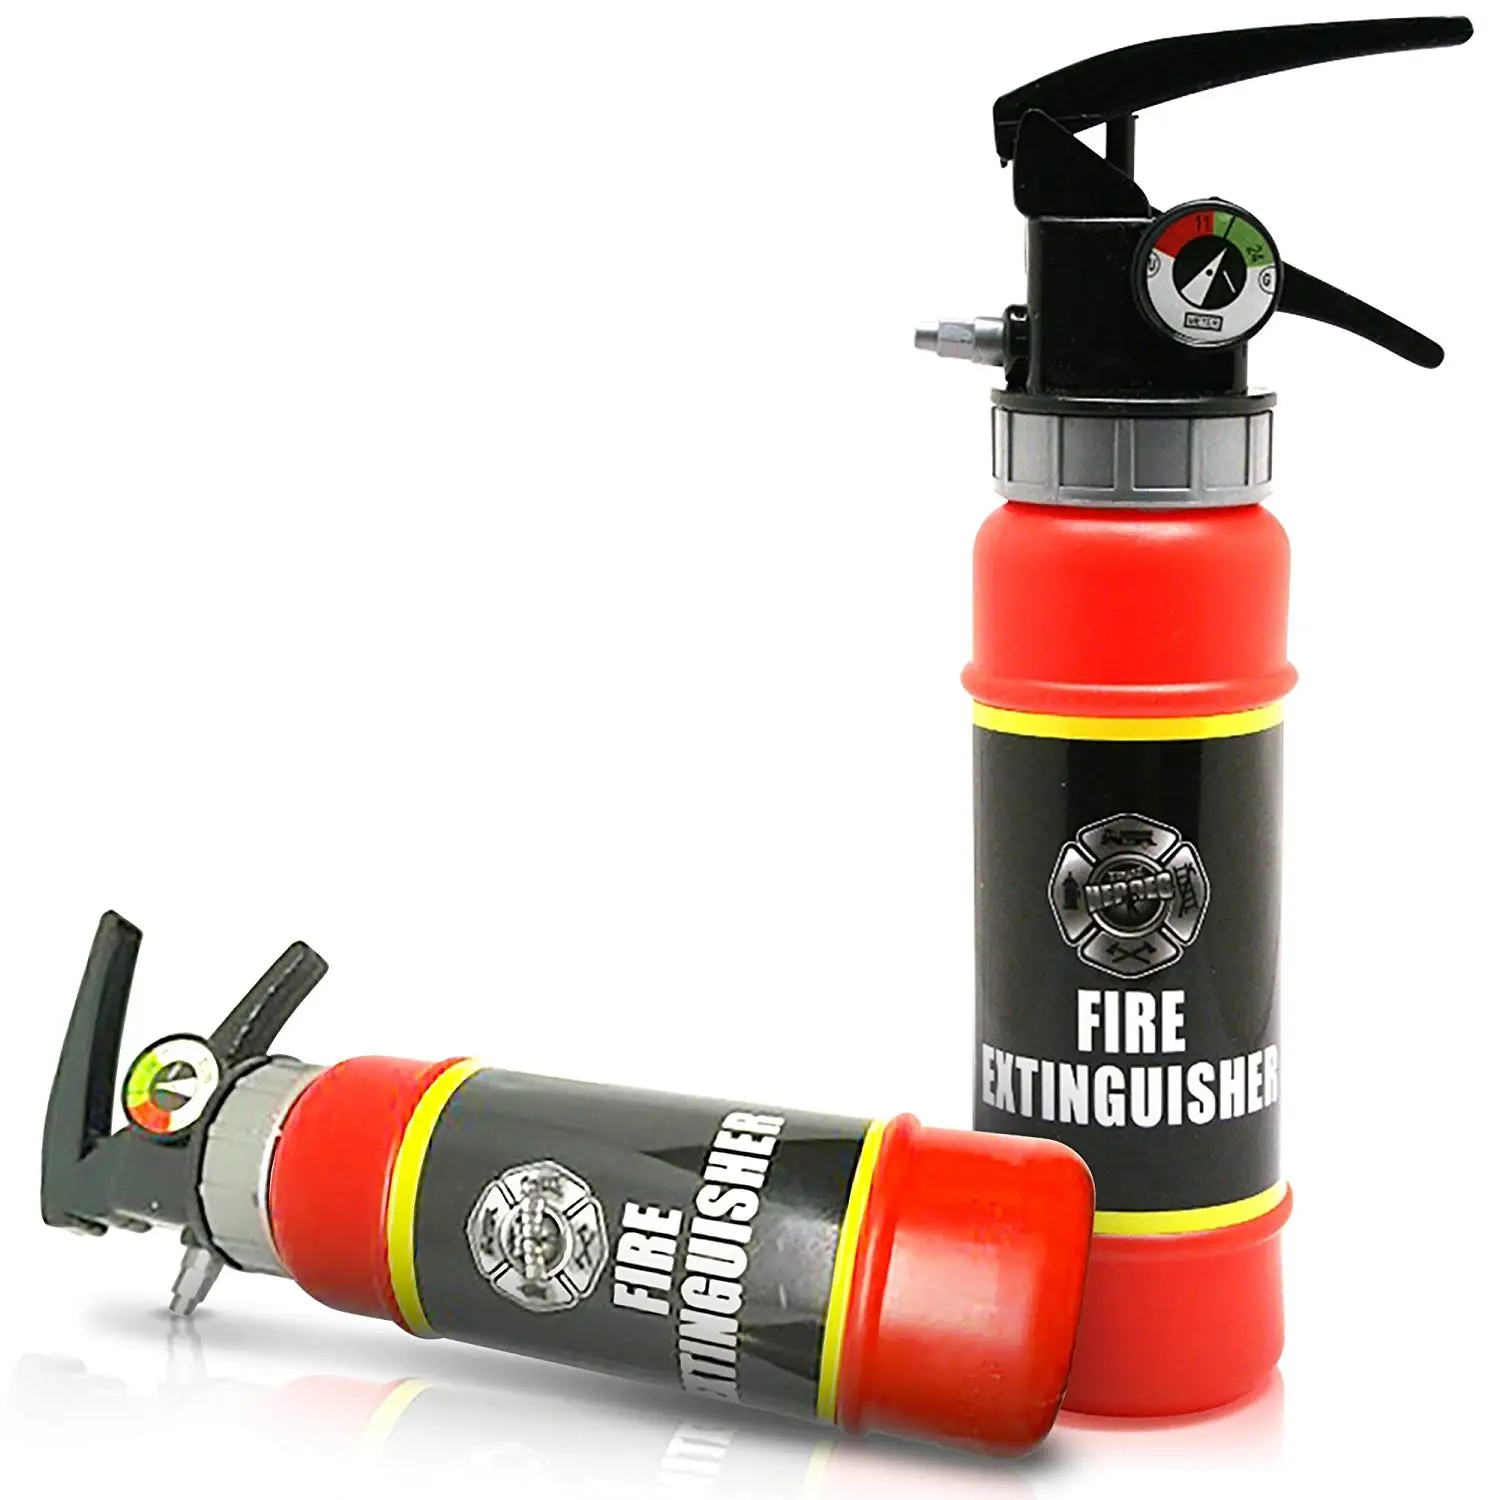 Buy Fire Extinguisher Squirter Toy By Artcreativity 9 Water Gun With 1602